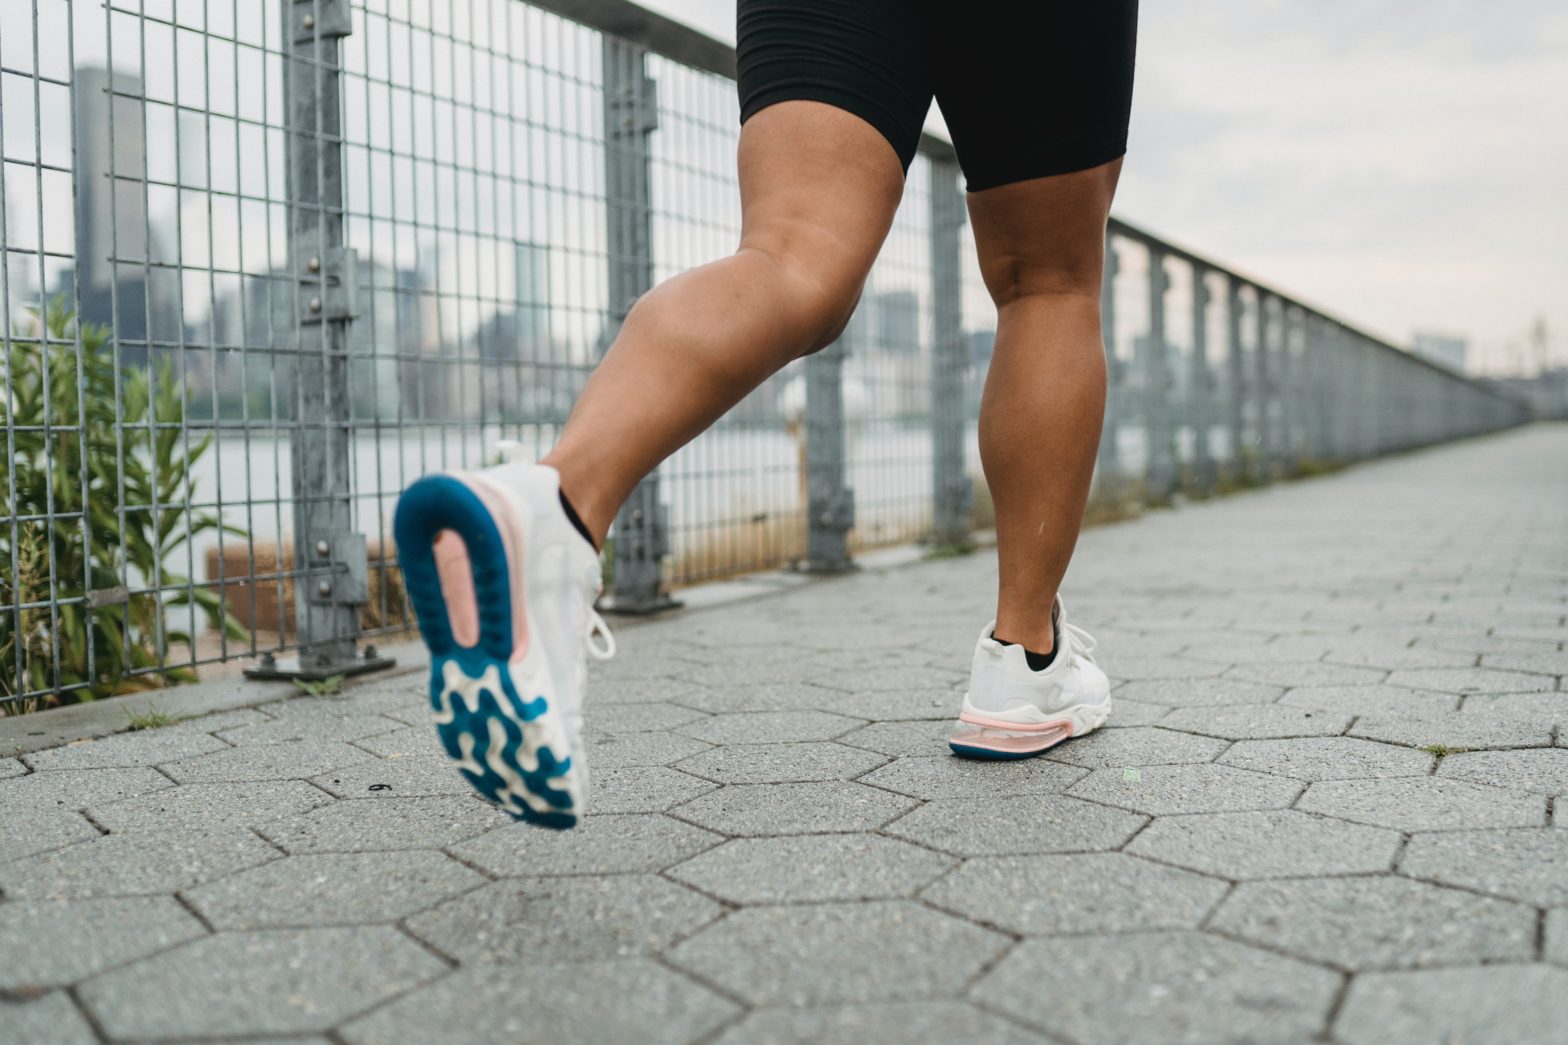 Walking: The Most Underrated Form Of Exercise For Better Health